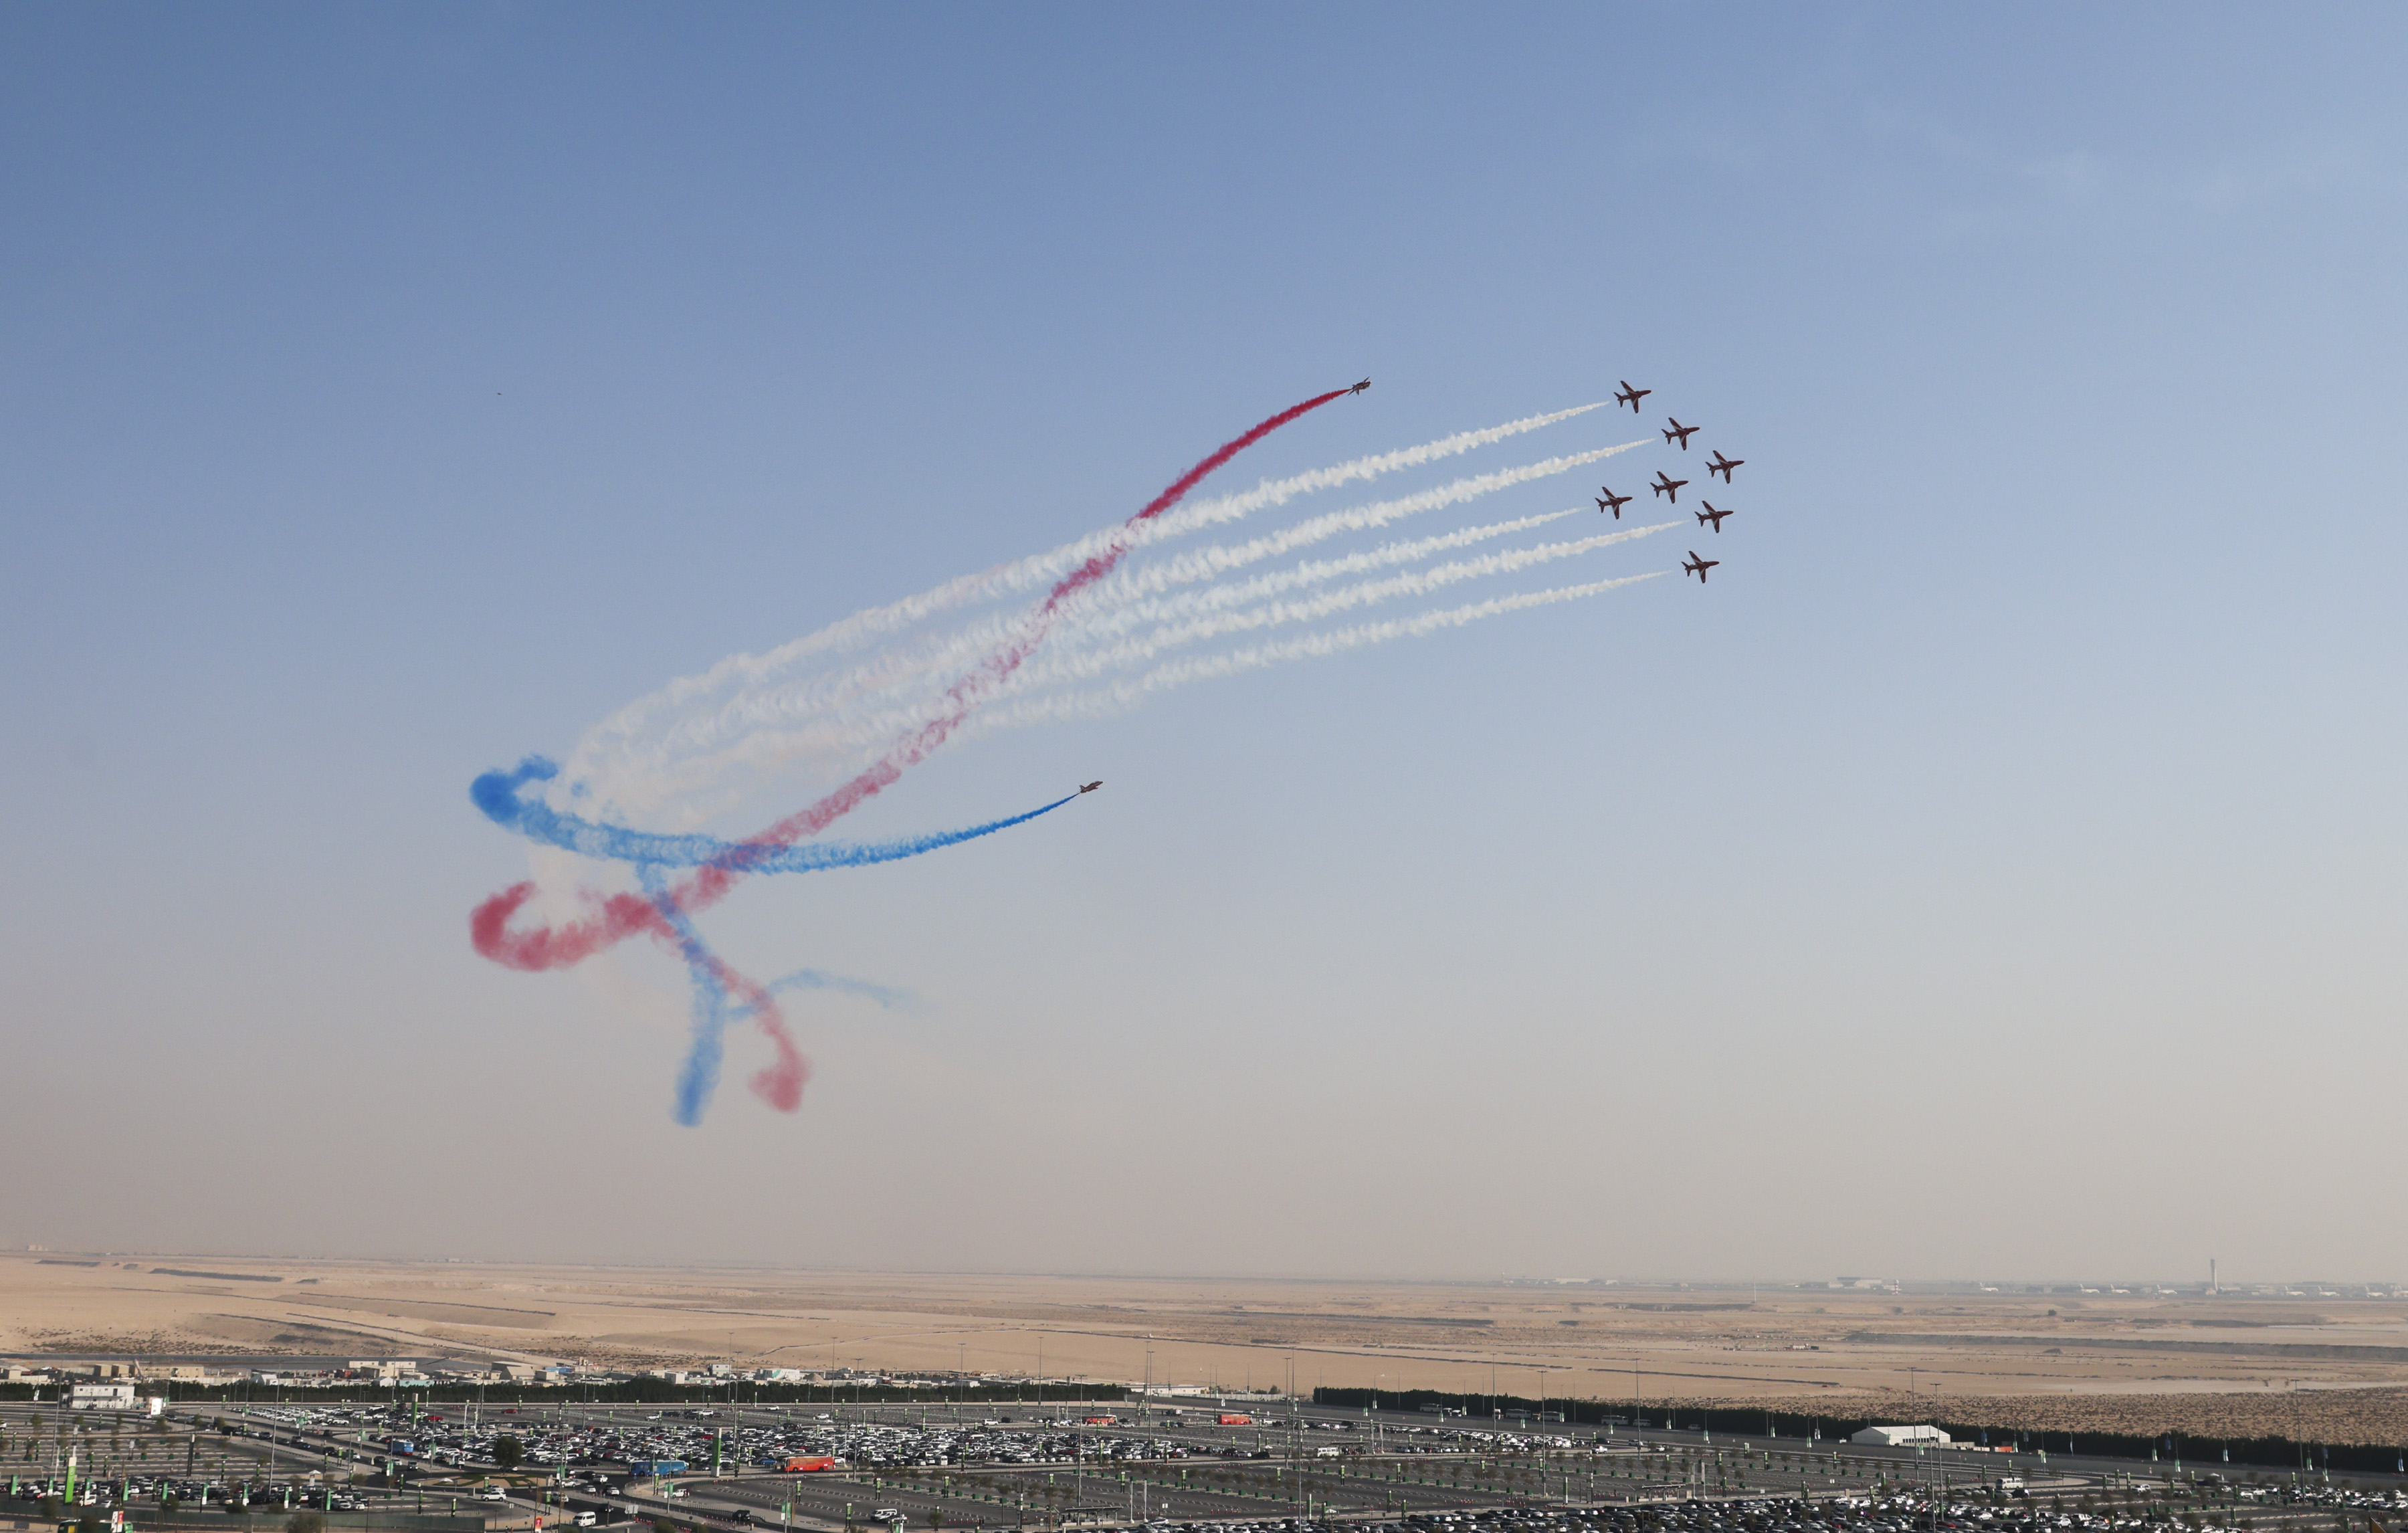 Red Arrows in formation with smoke tails in red, white, and blue.